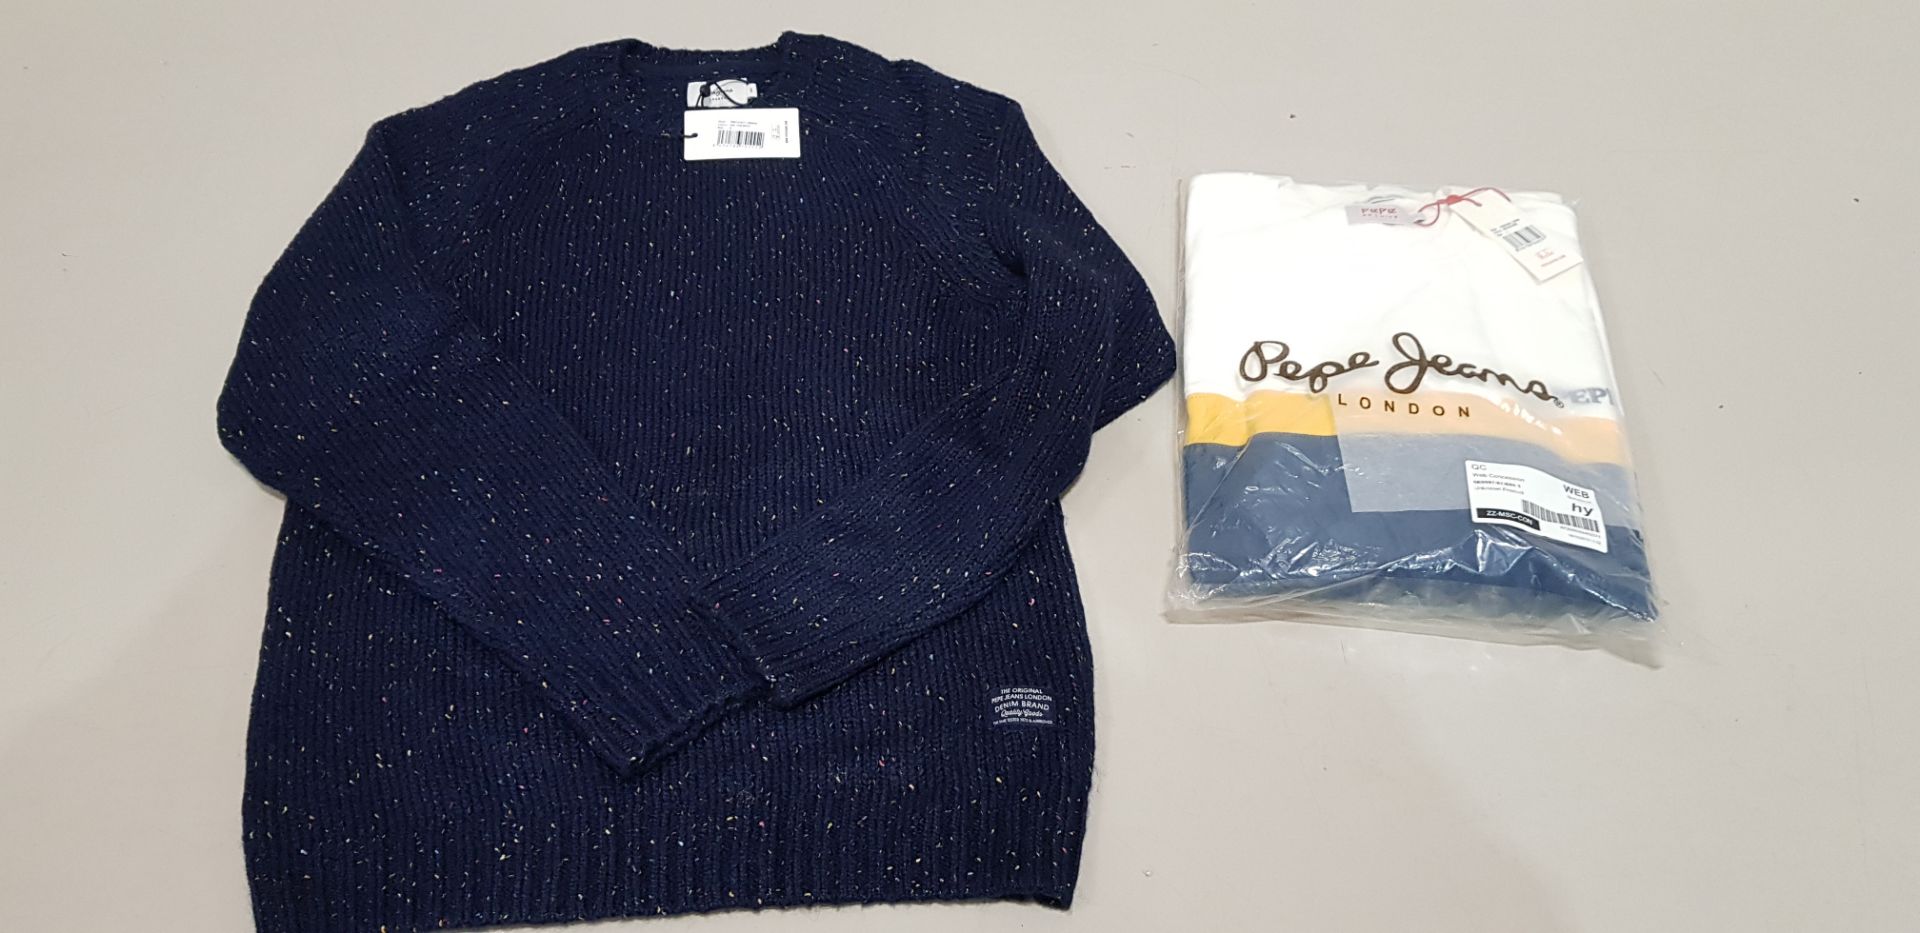 18 X BRAND NEW PIECE MIXED CLOTHING LOT CONTAINING PEPE JEANS DENIS SWEATSHIRTS - AND PEPE JEANS